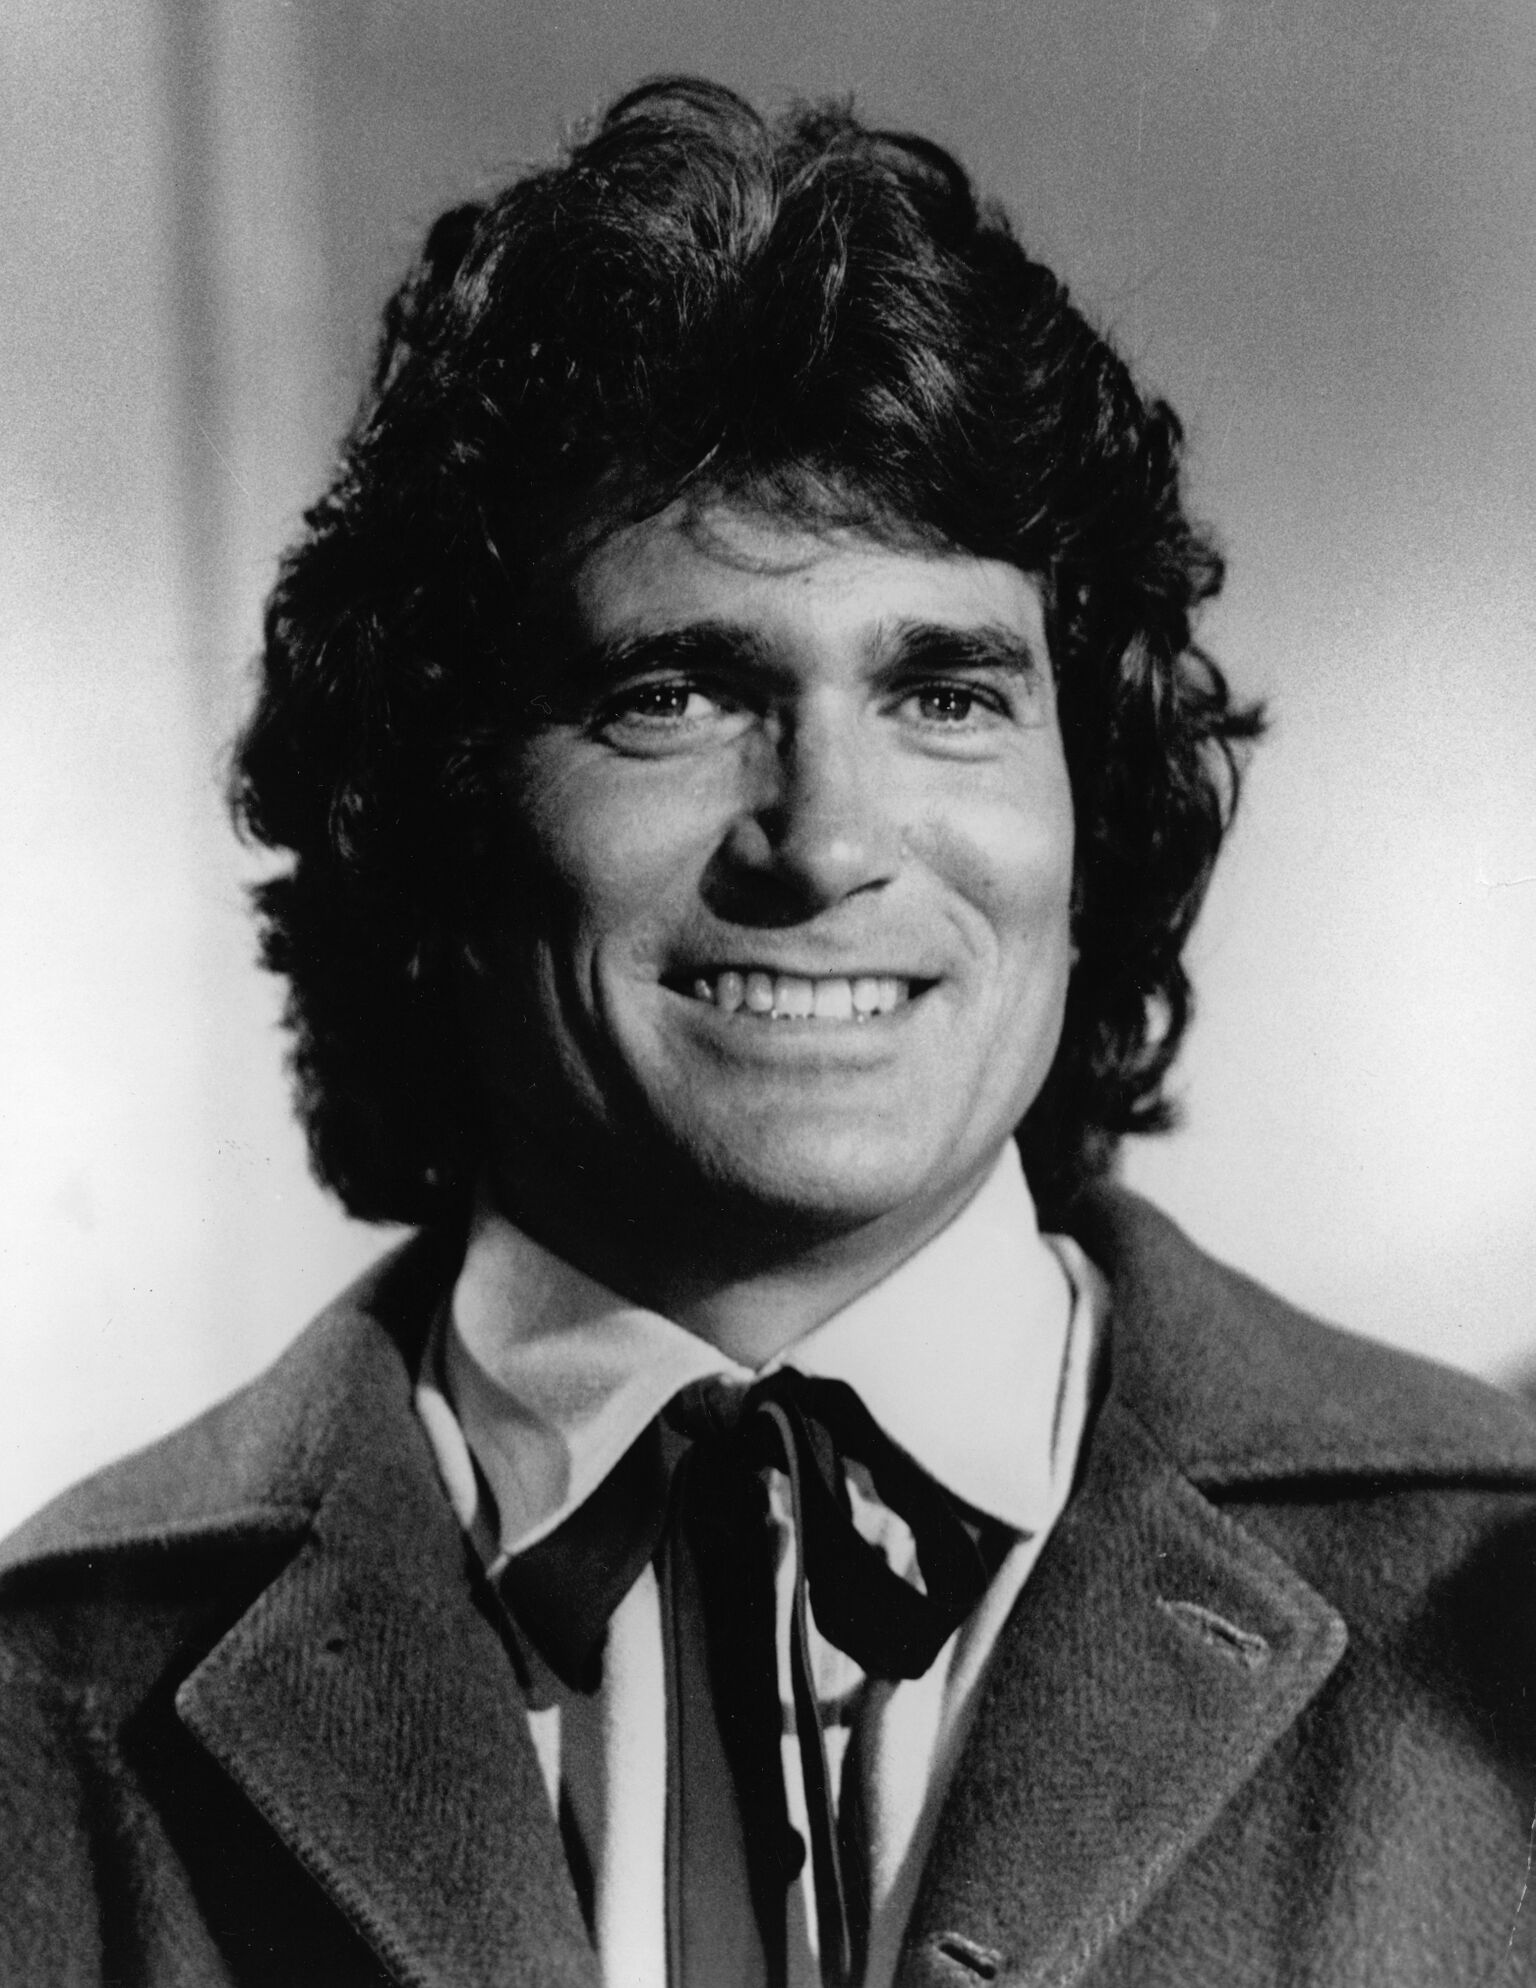 Michael Landon (1936 - 1991) smiling in costume from the television series, "The Little House On The Prairie" | Getty Images